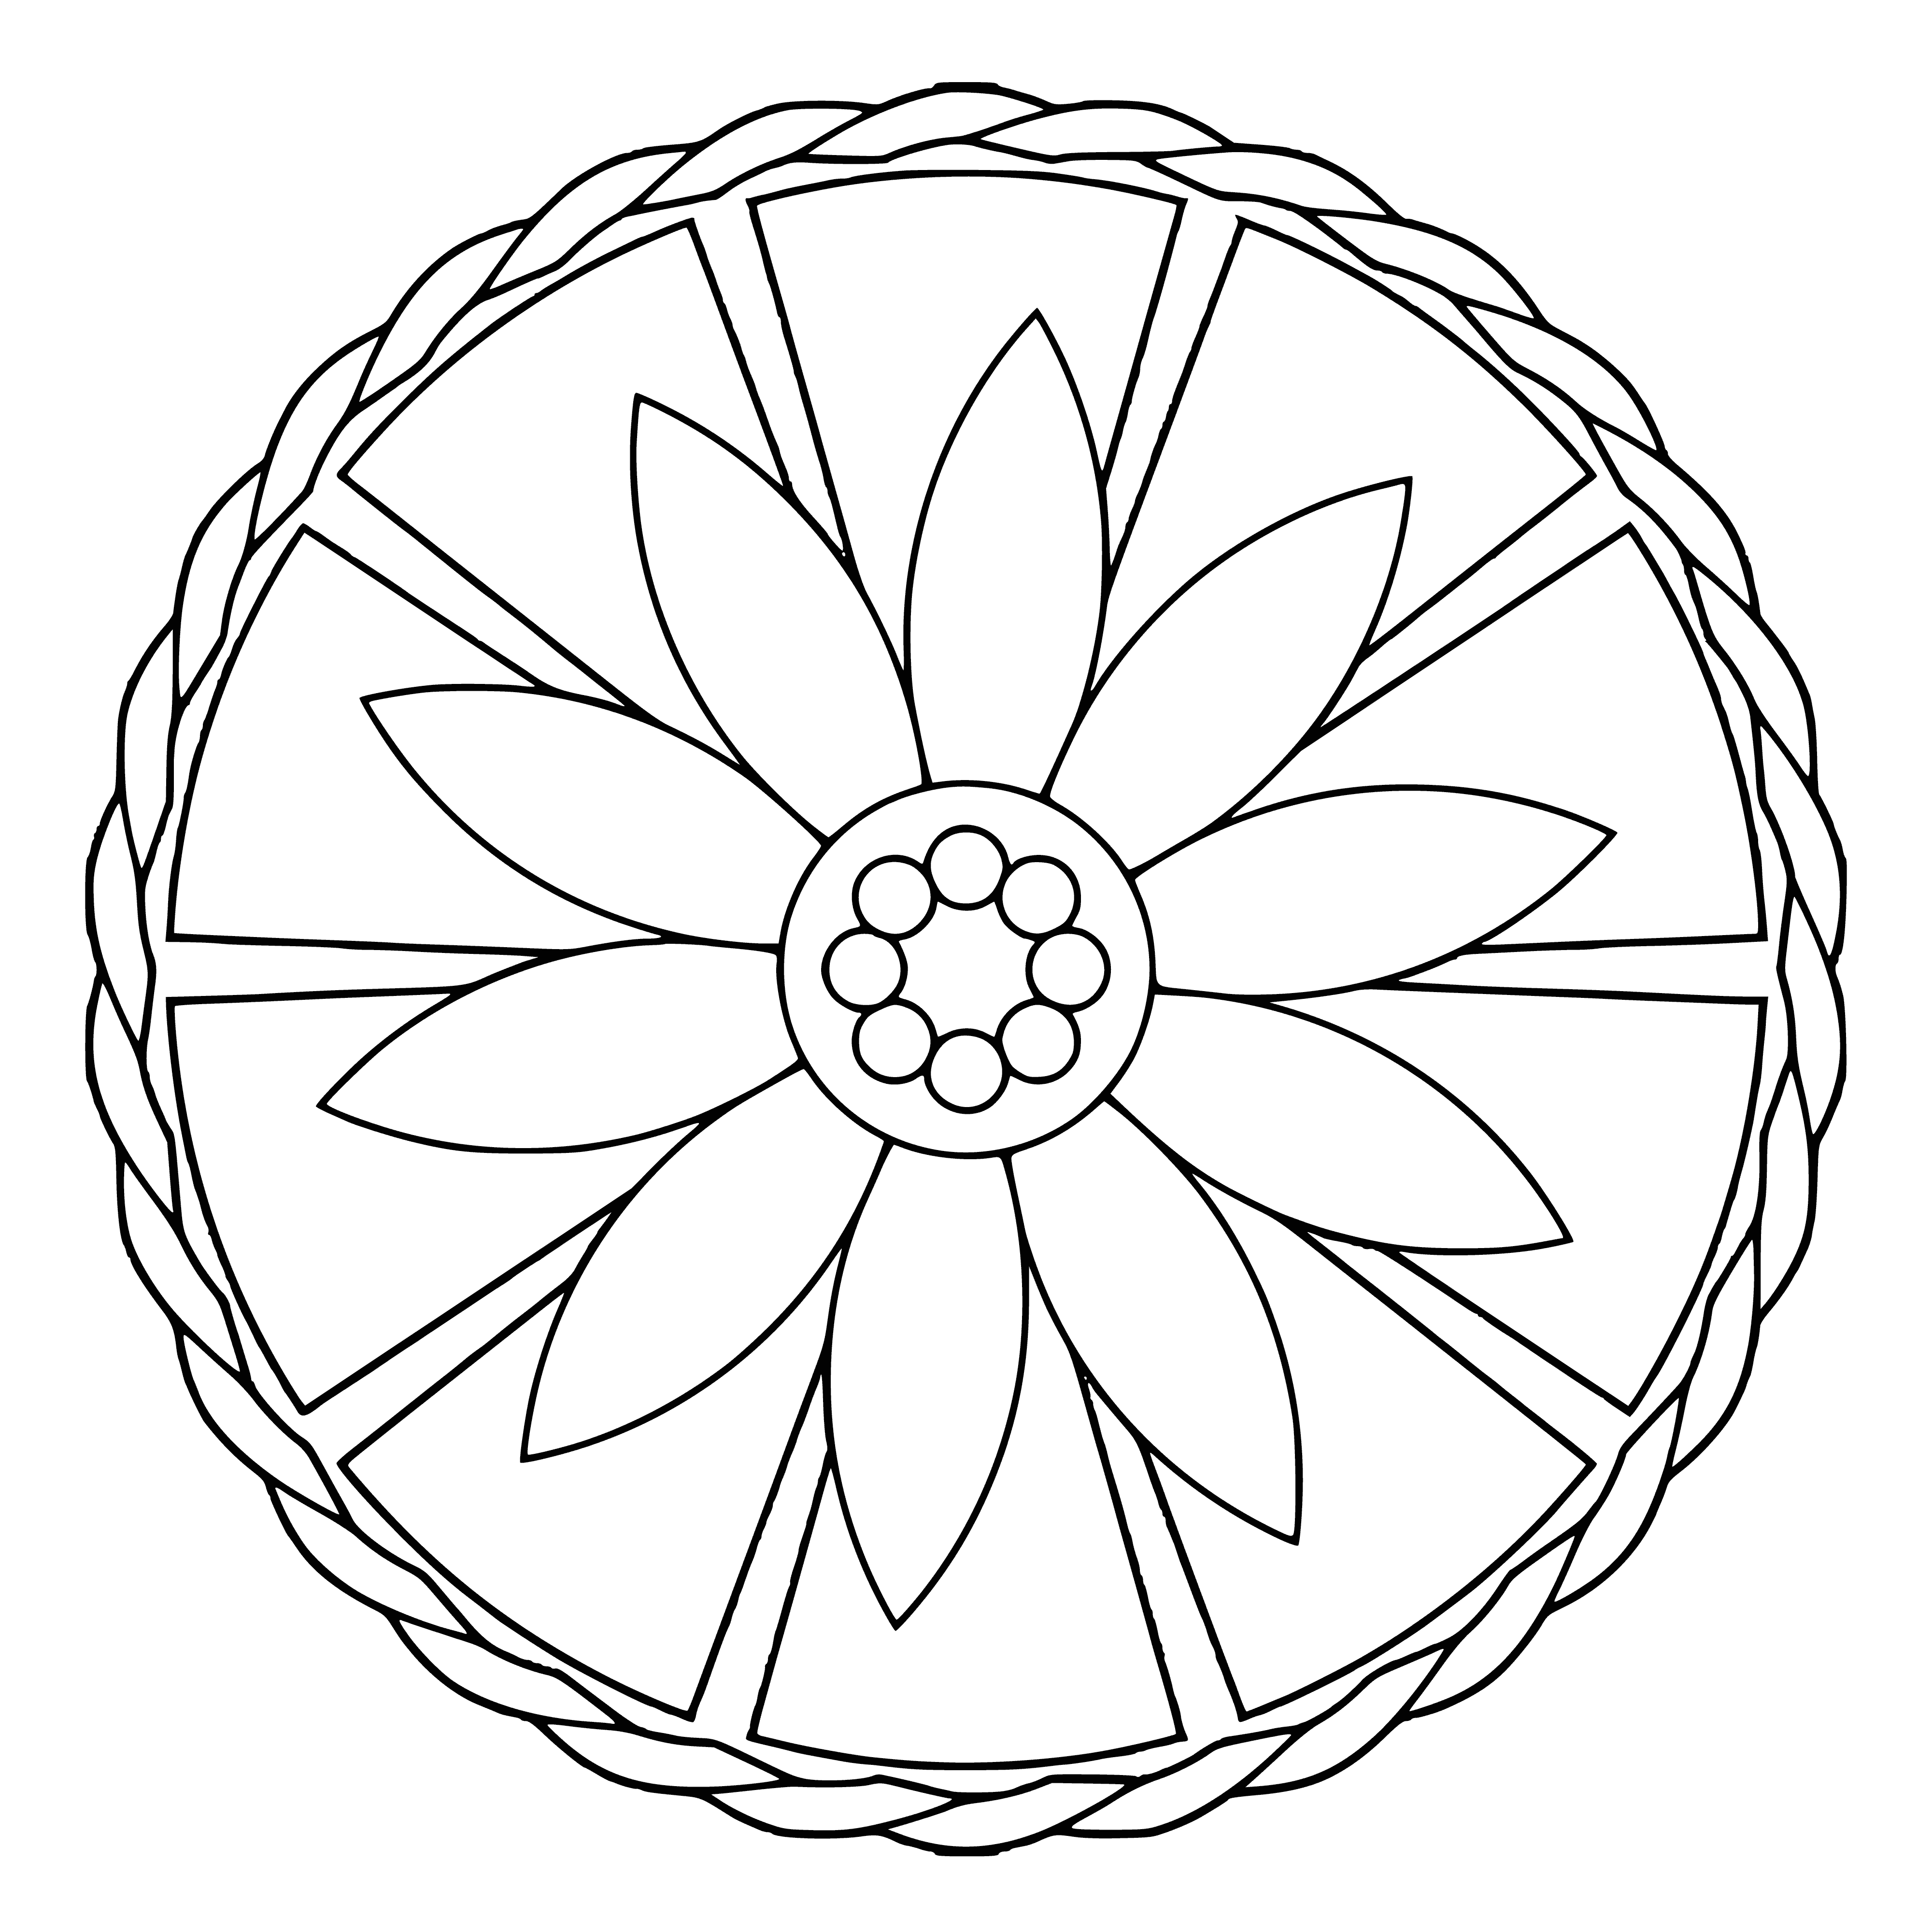 coloring page: Explore multiple intricate mandala patterns & create unique designs with this coloring page.